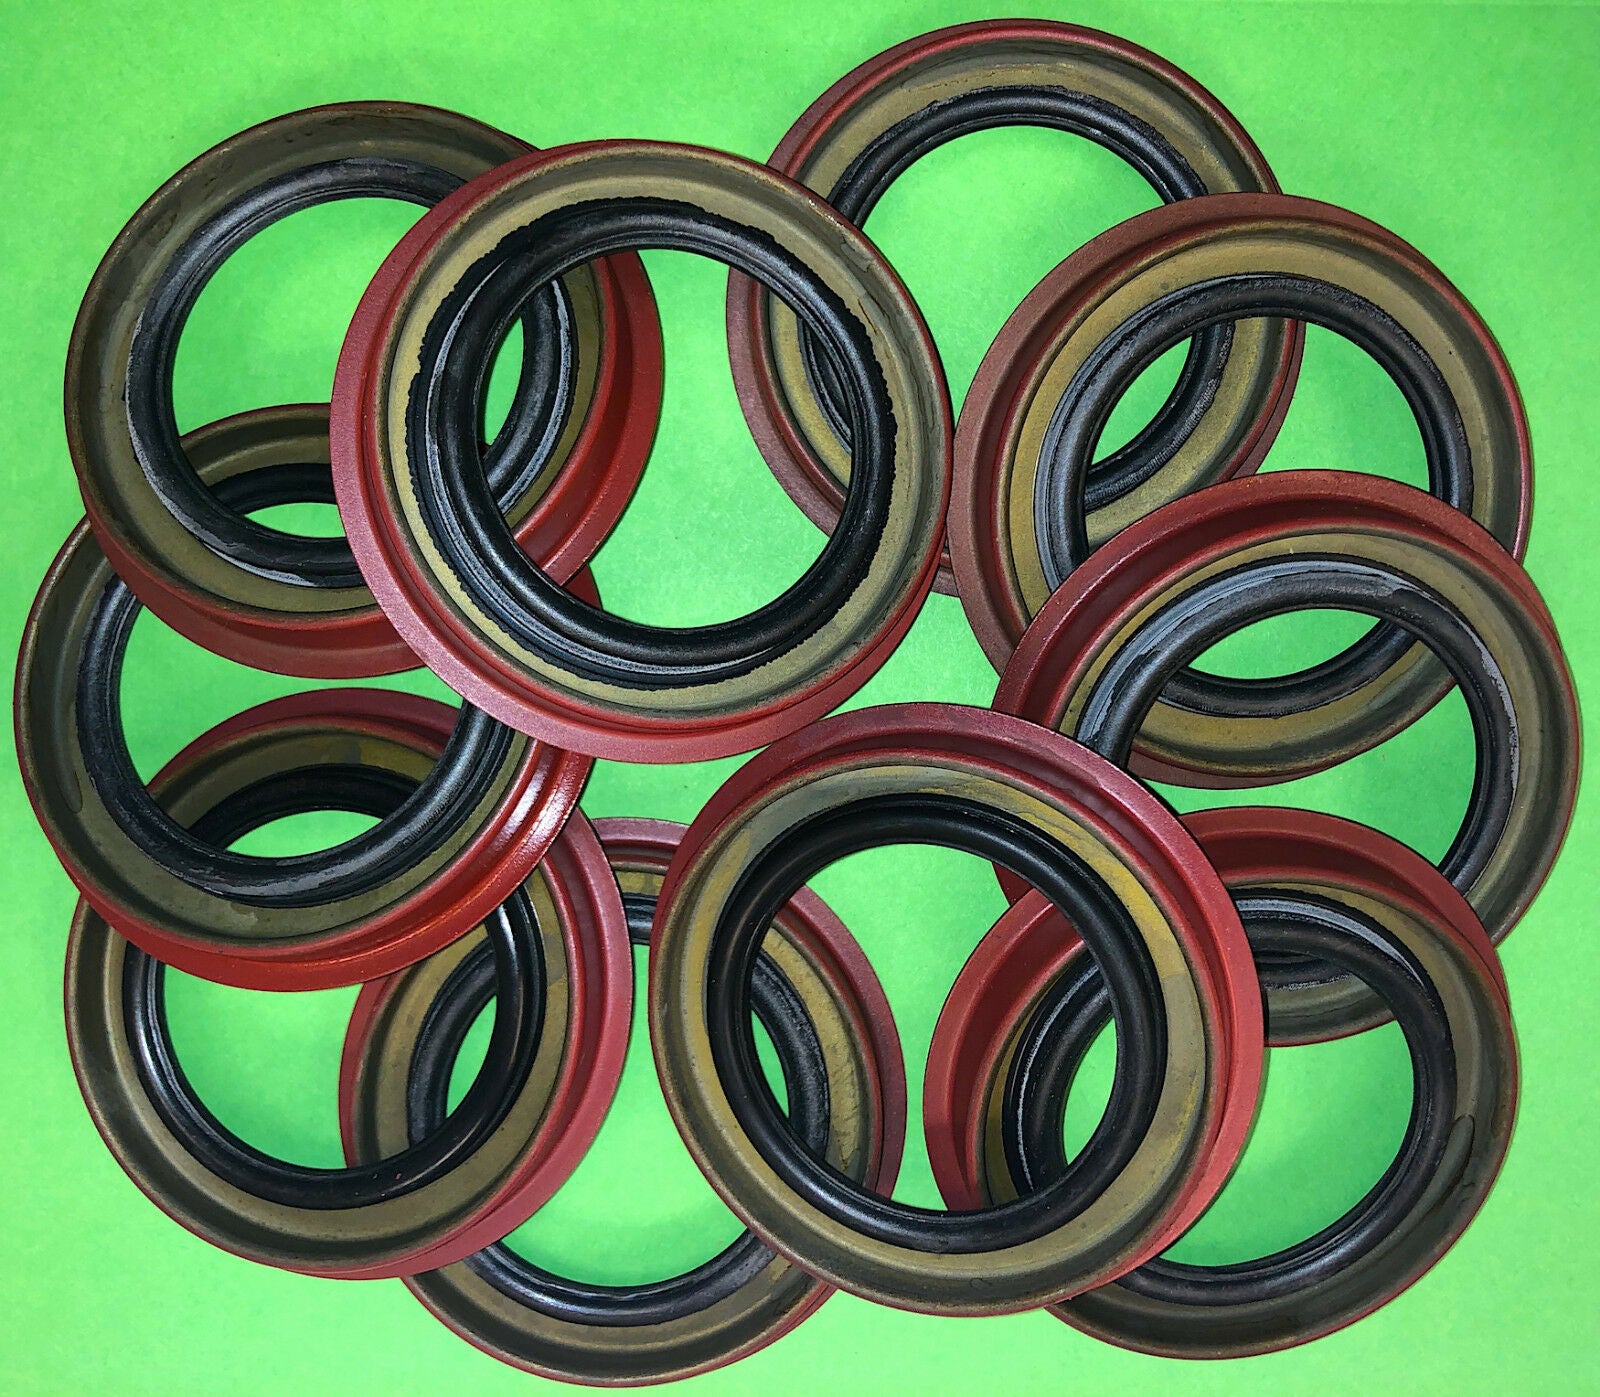 Lot of 100 each- SEALS, FRONT TRANSMISSION; 6712NA 5740339 8626916 5330010254212